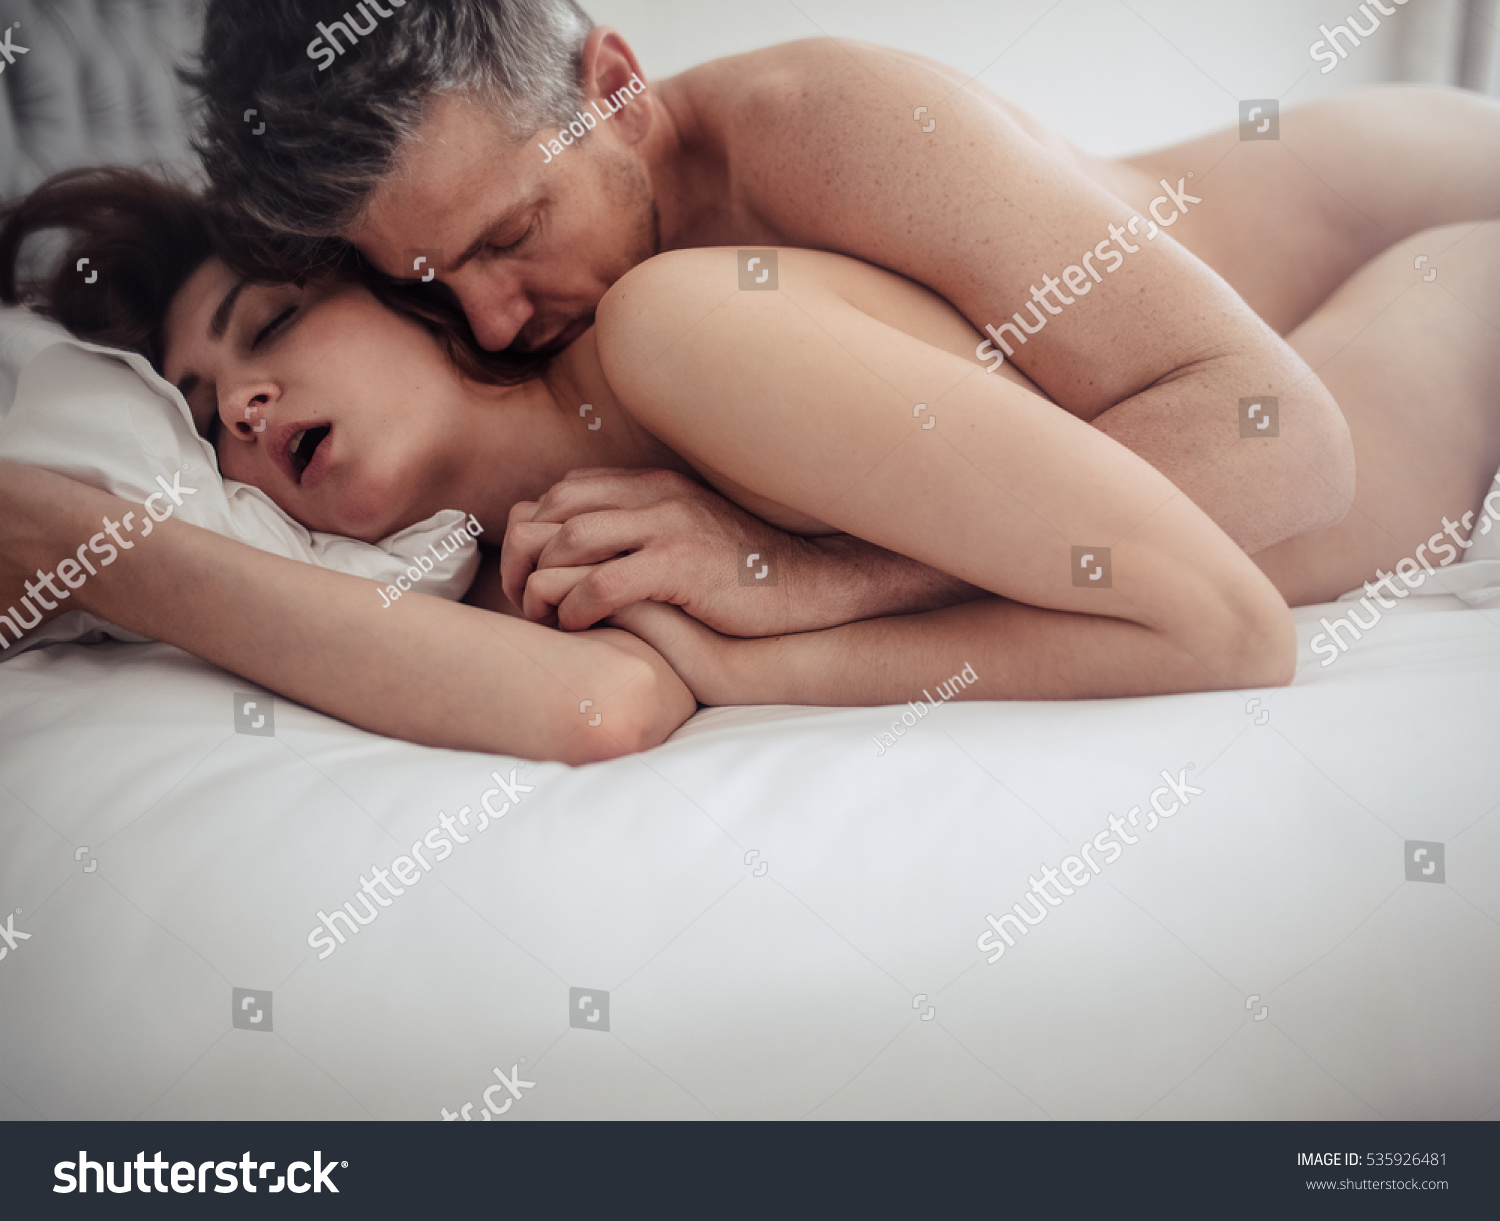 An naked woman kissing another naked woman